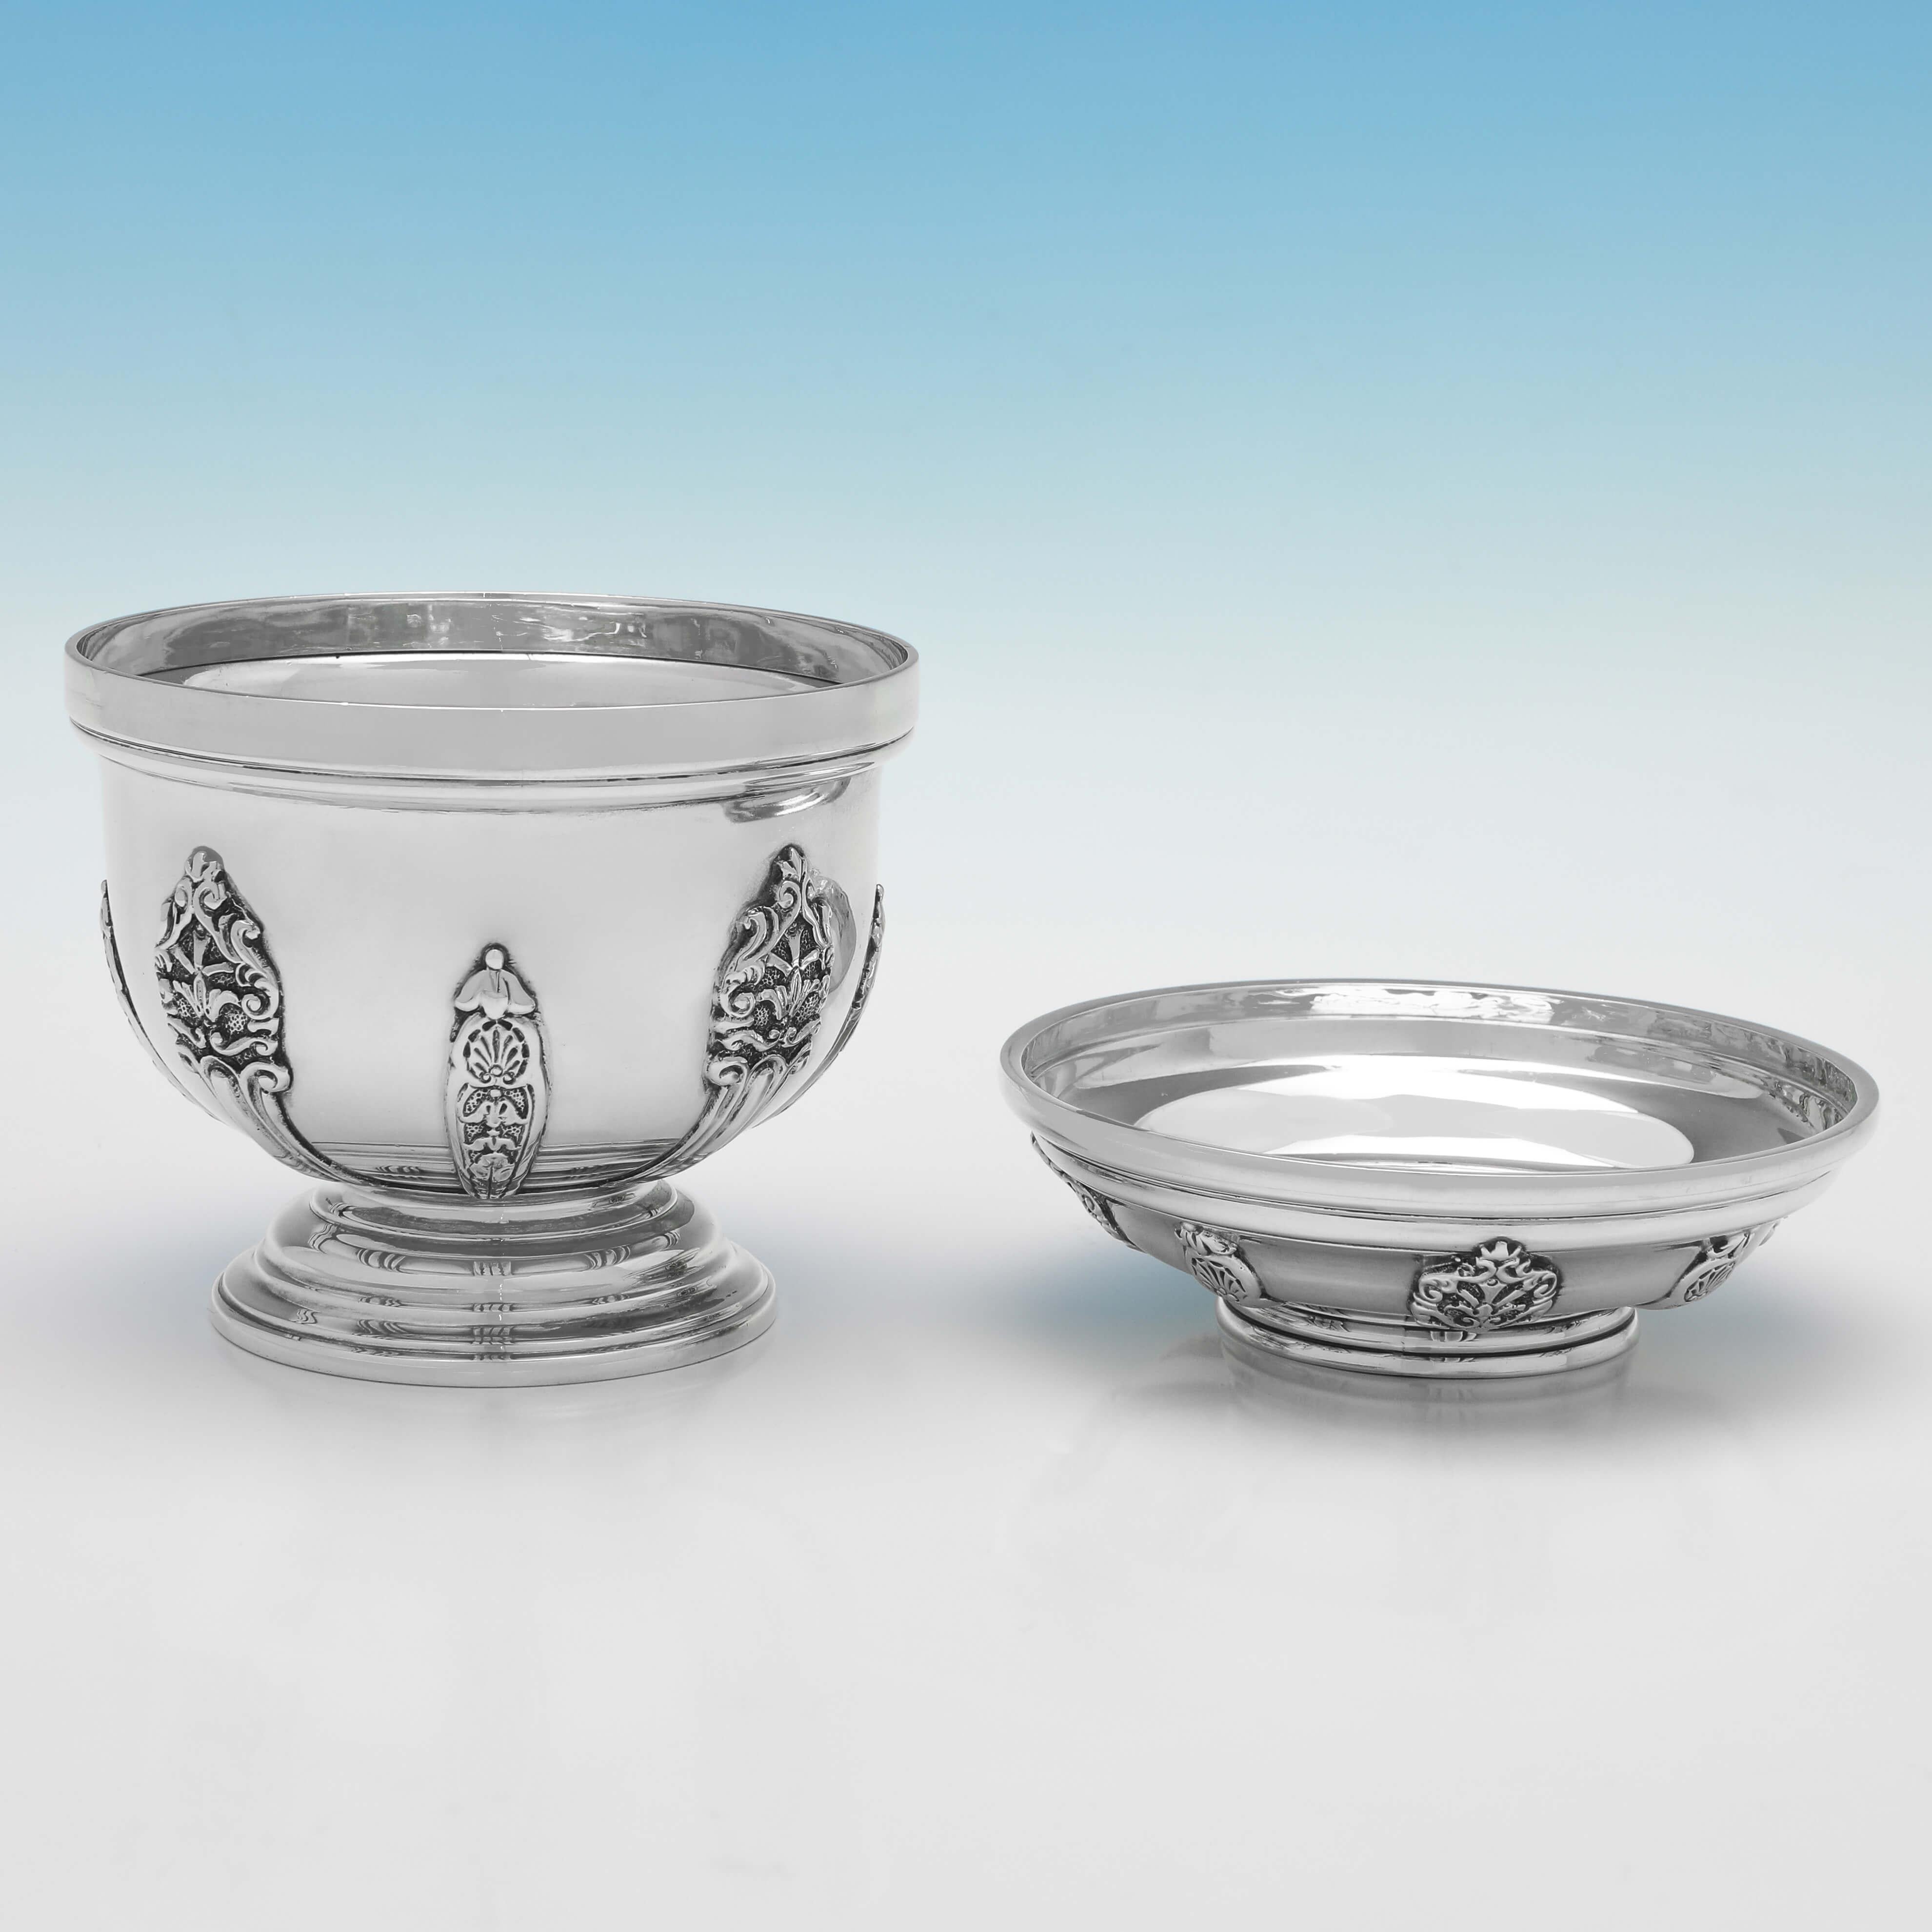 Hallmarked in London in 1906 by Henry & Arthur Vander, this attractive, Edwardian, Antique Sterling Silver Sugar Bowl with Cover, is a wonderful reproduction of a George II design. 

The sugar bowl measures 4.5